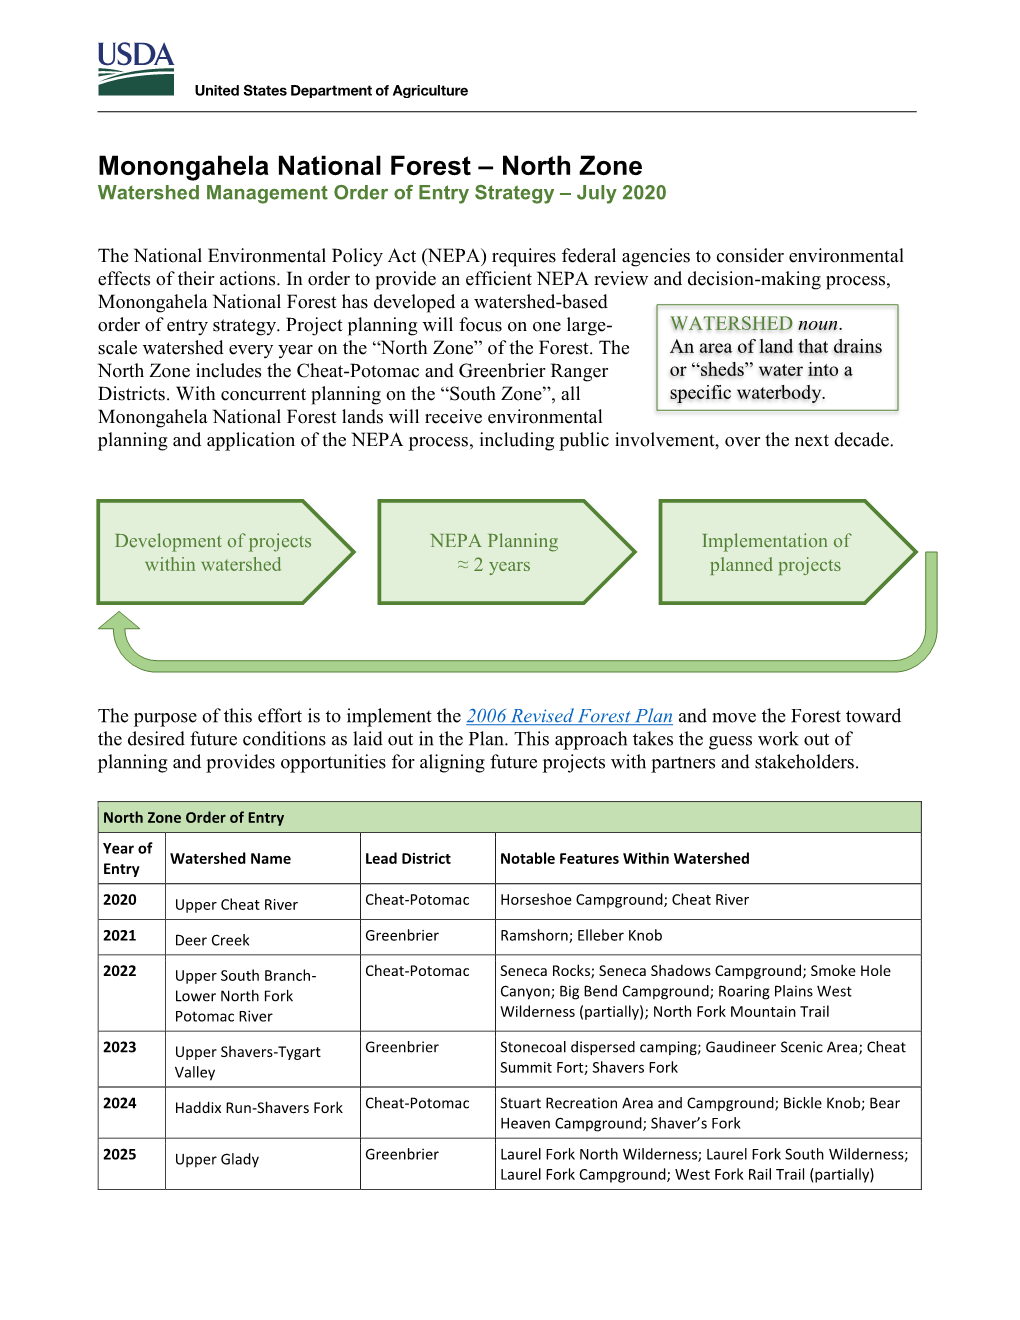 Monongahela National Forest – North Zone Watershed Management Order of Entry Strategy – July 2020